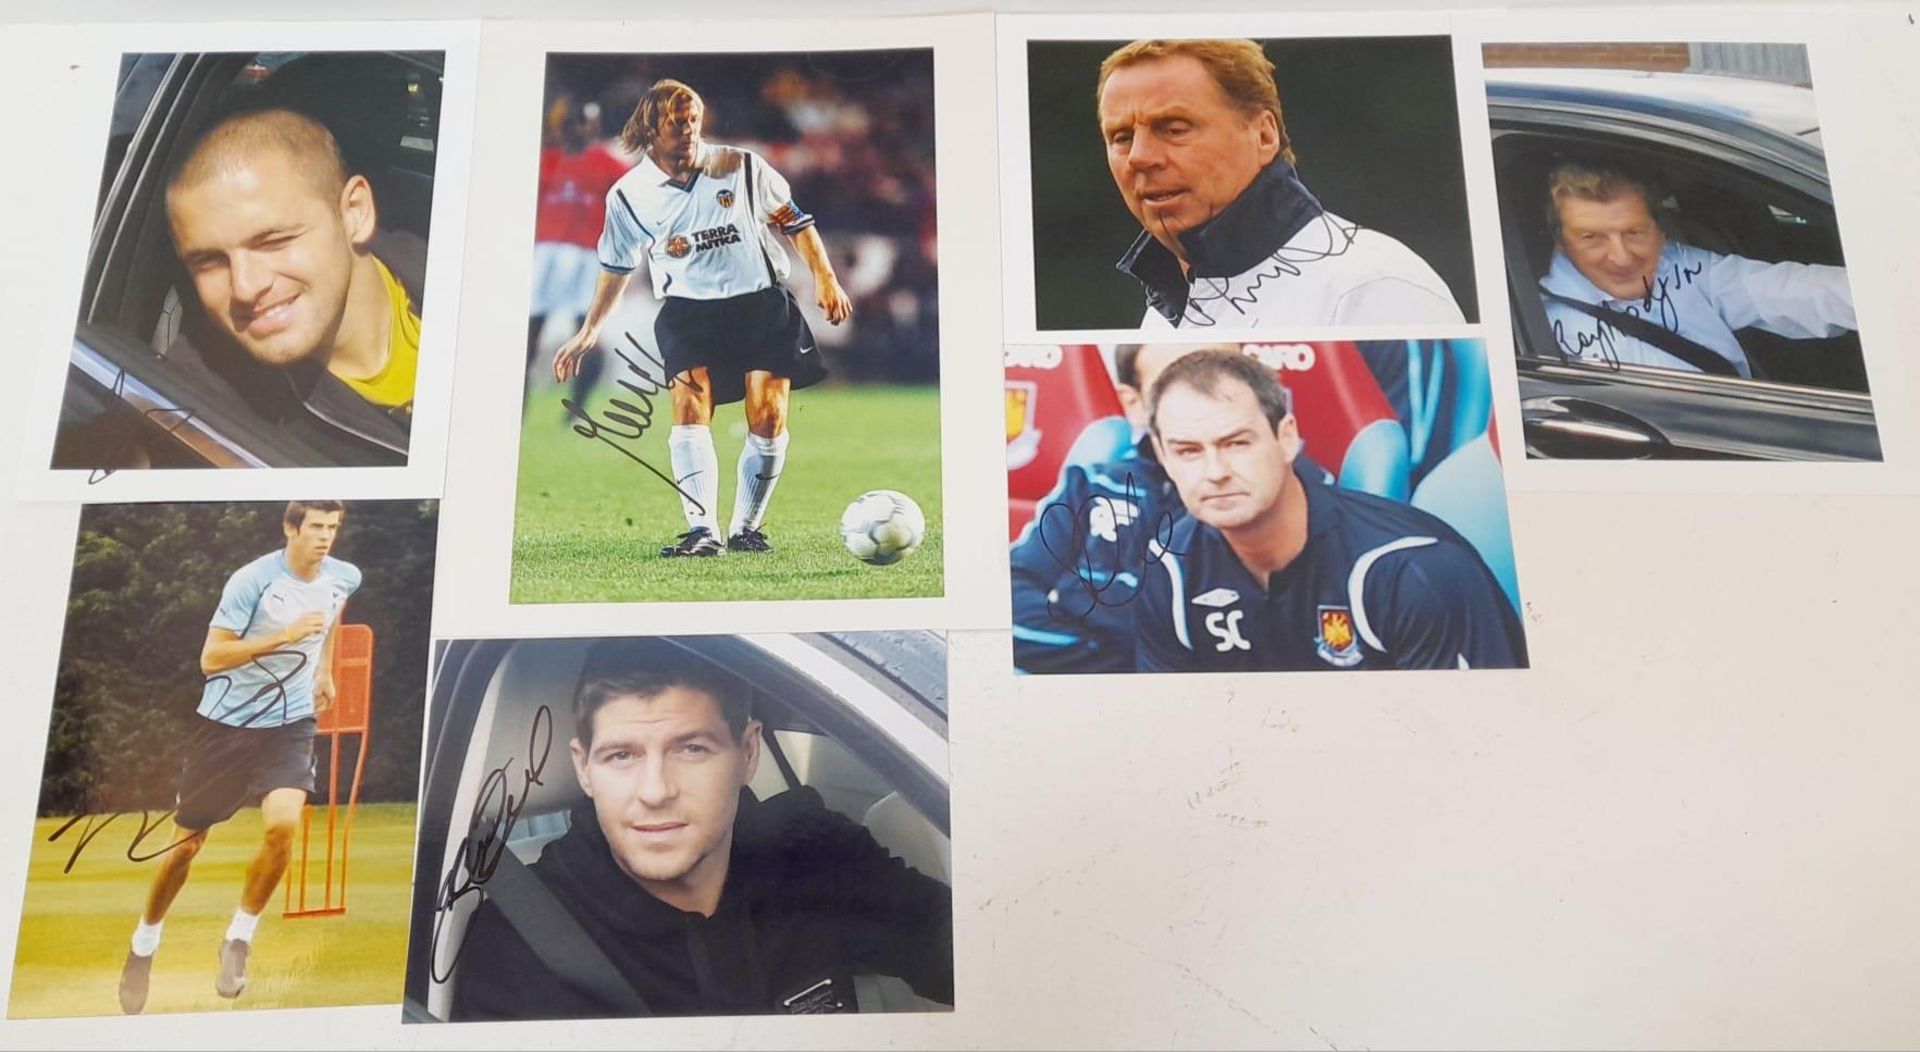 Seven Autographed Pictures from the World of Football: Gareth Bale, Joe Cole, Harry Redknapp,